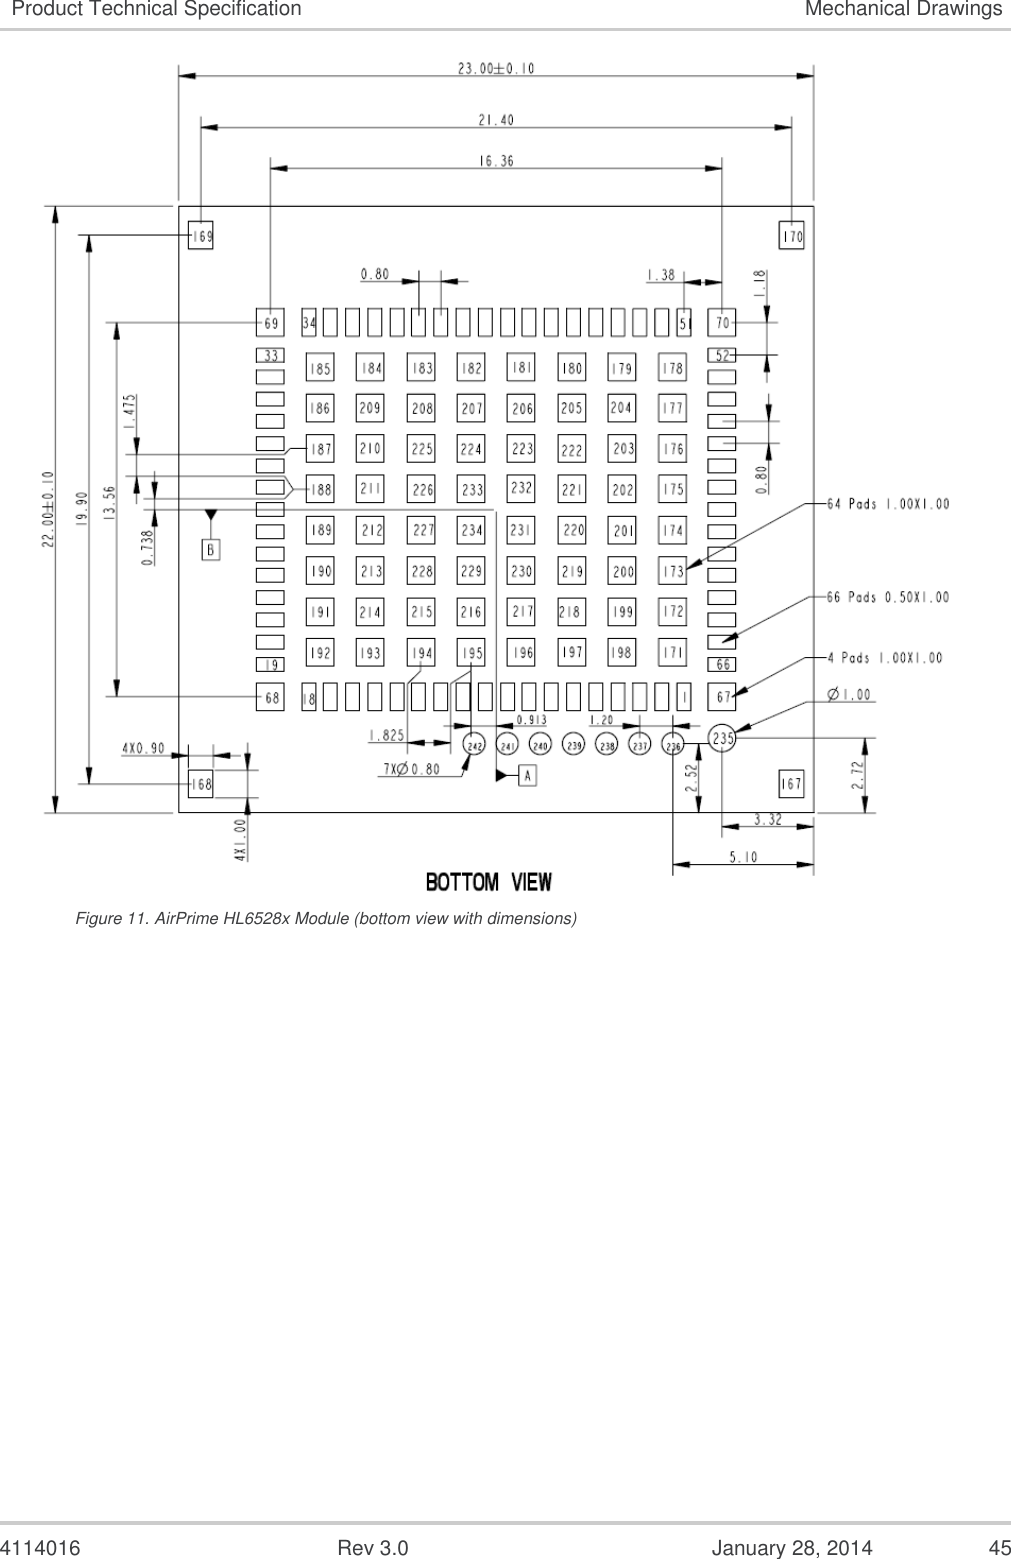  4114016  Rev 3.0  January 28, 2014  45 Product Technical Specification Mechanical Drawings  Figure 11. AirPrime HL6528x Module (bottom view with dimensions) 